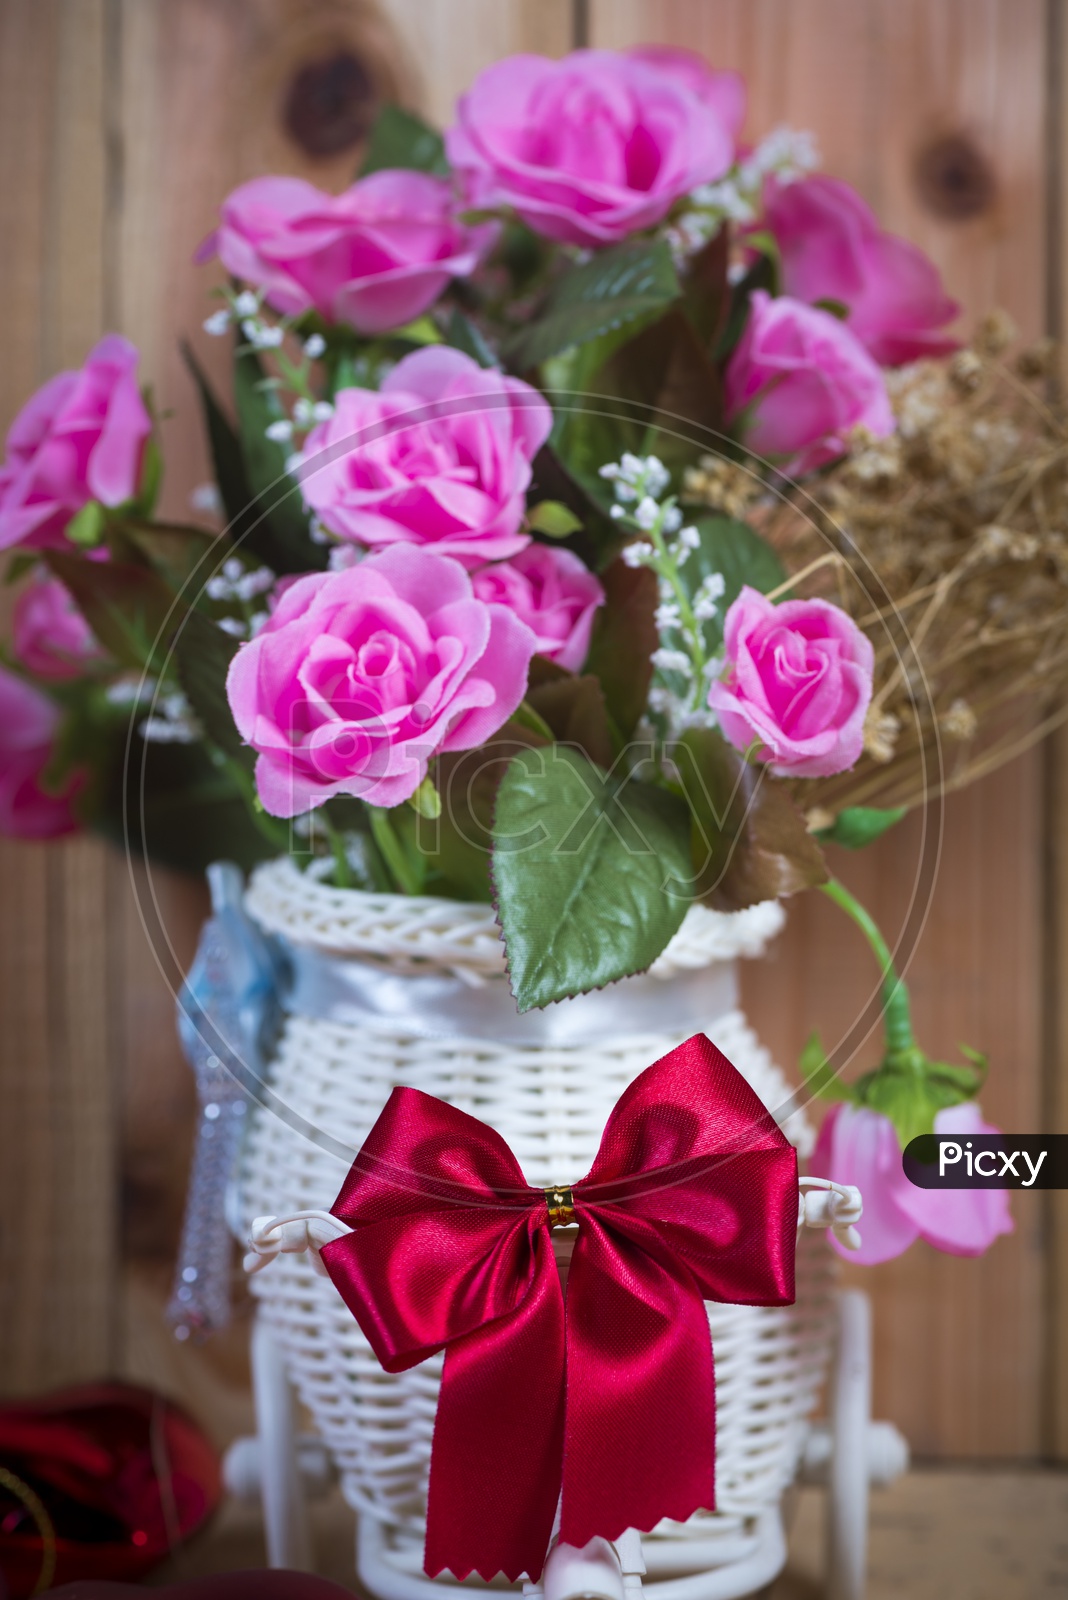 Rose Flowers Bouquet Over Wooden Background With Vintage Filter